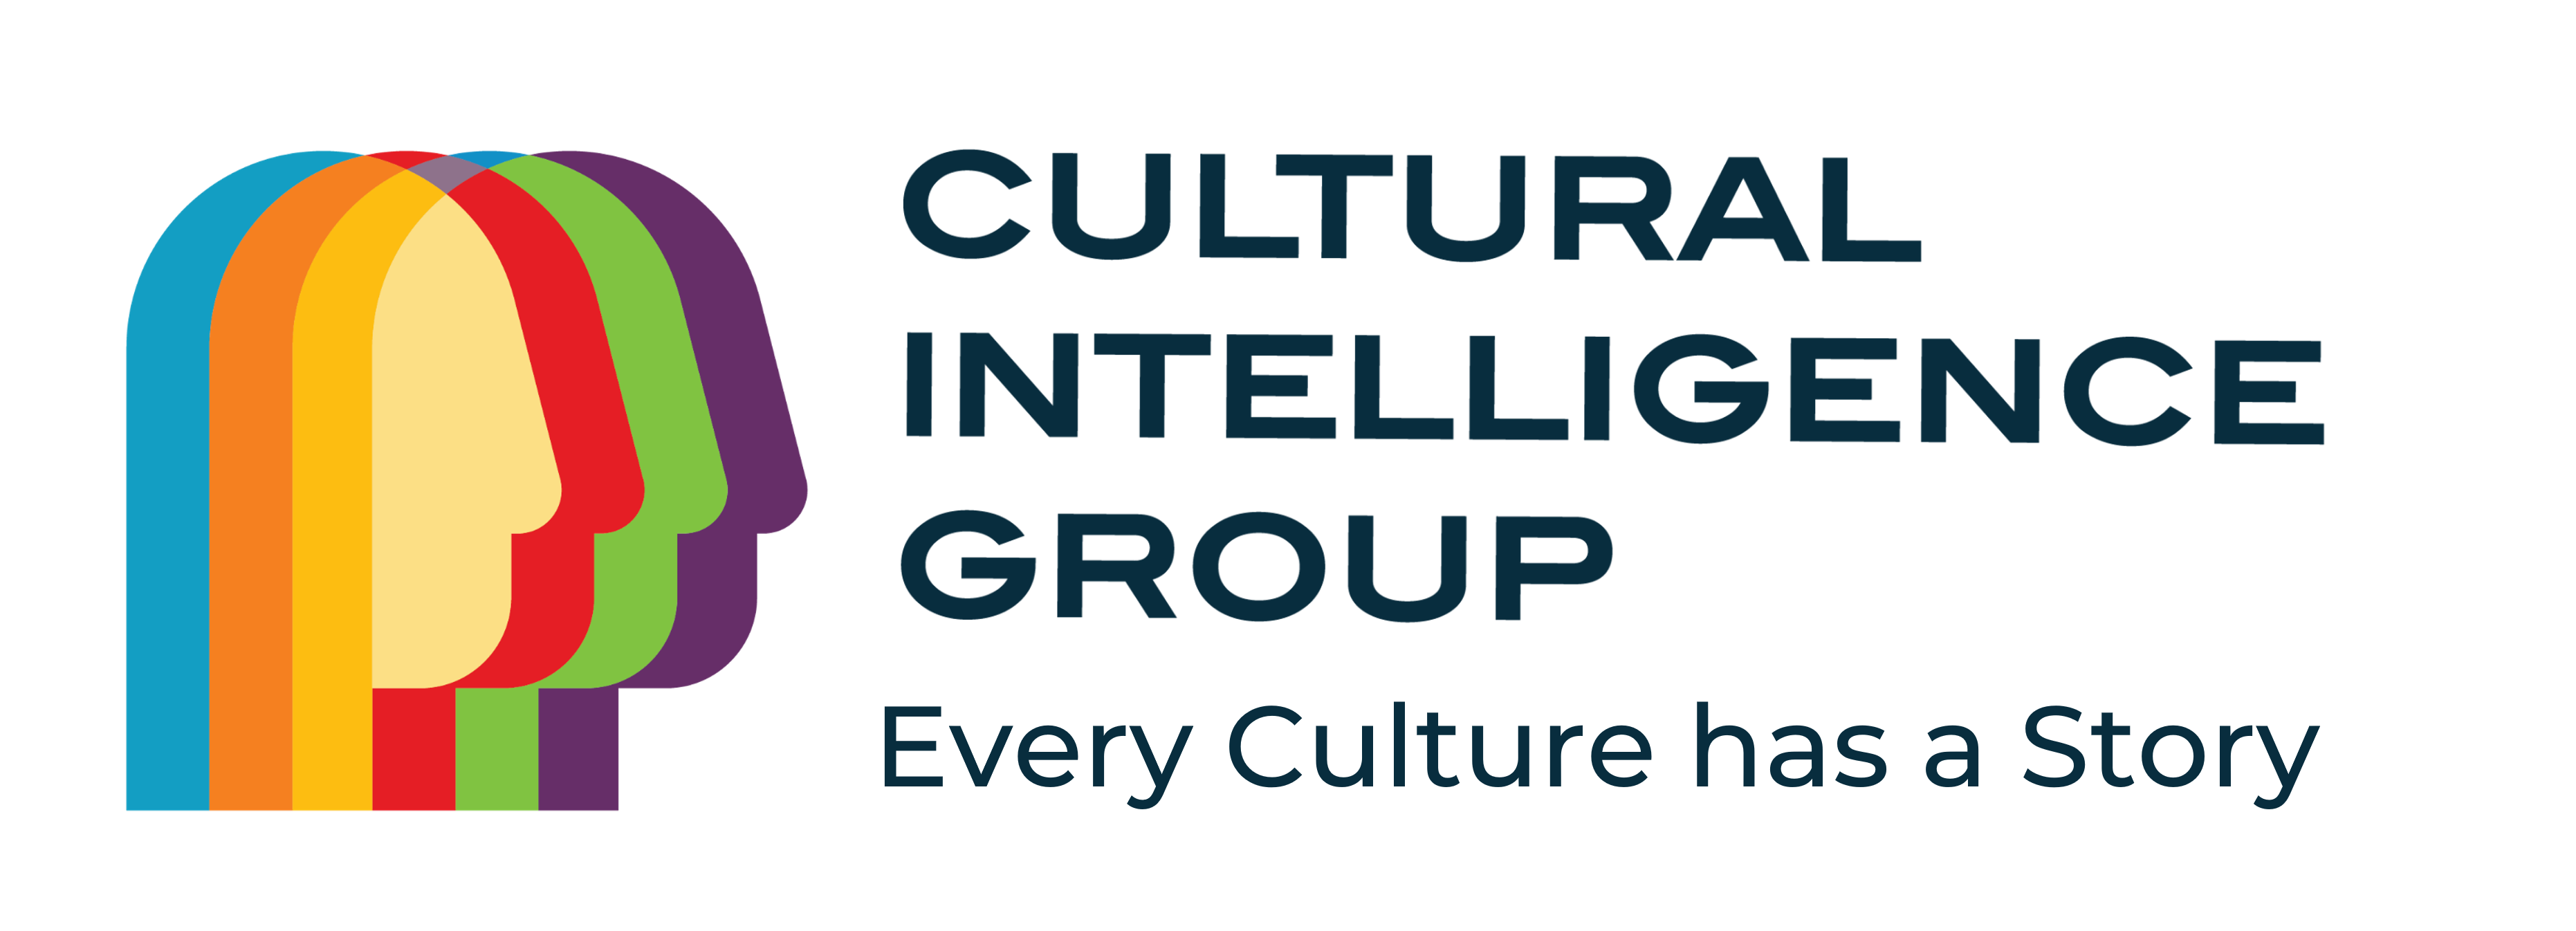 Cultural Intelligence Group logo; Multicolor layered silhouette of a human face to the left of Cultural Intelligence Group with tagline underneath, Every Culture has a Story